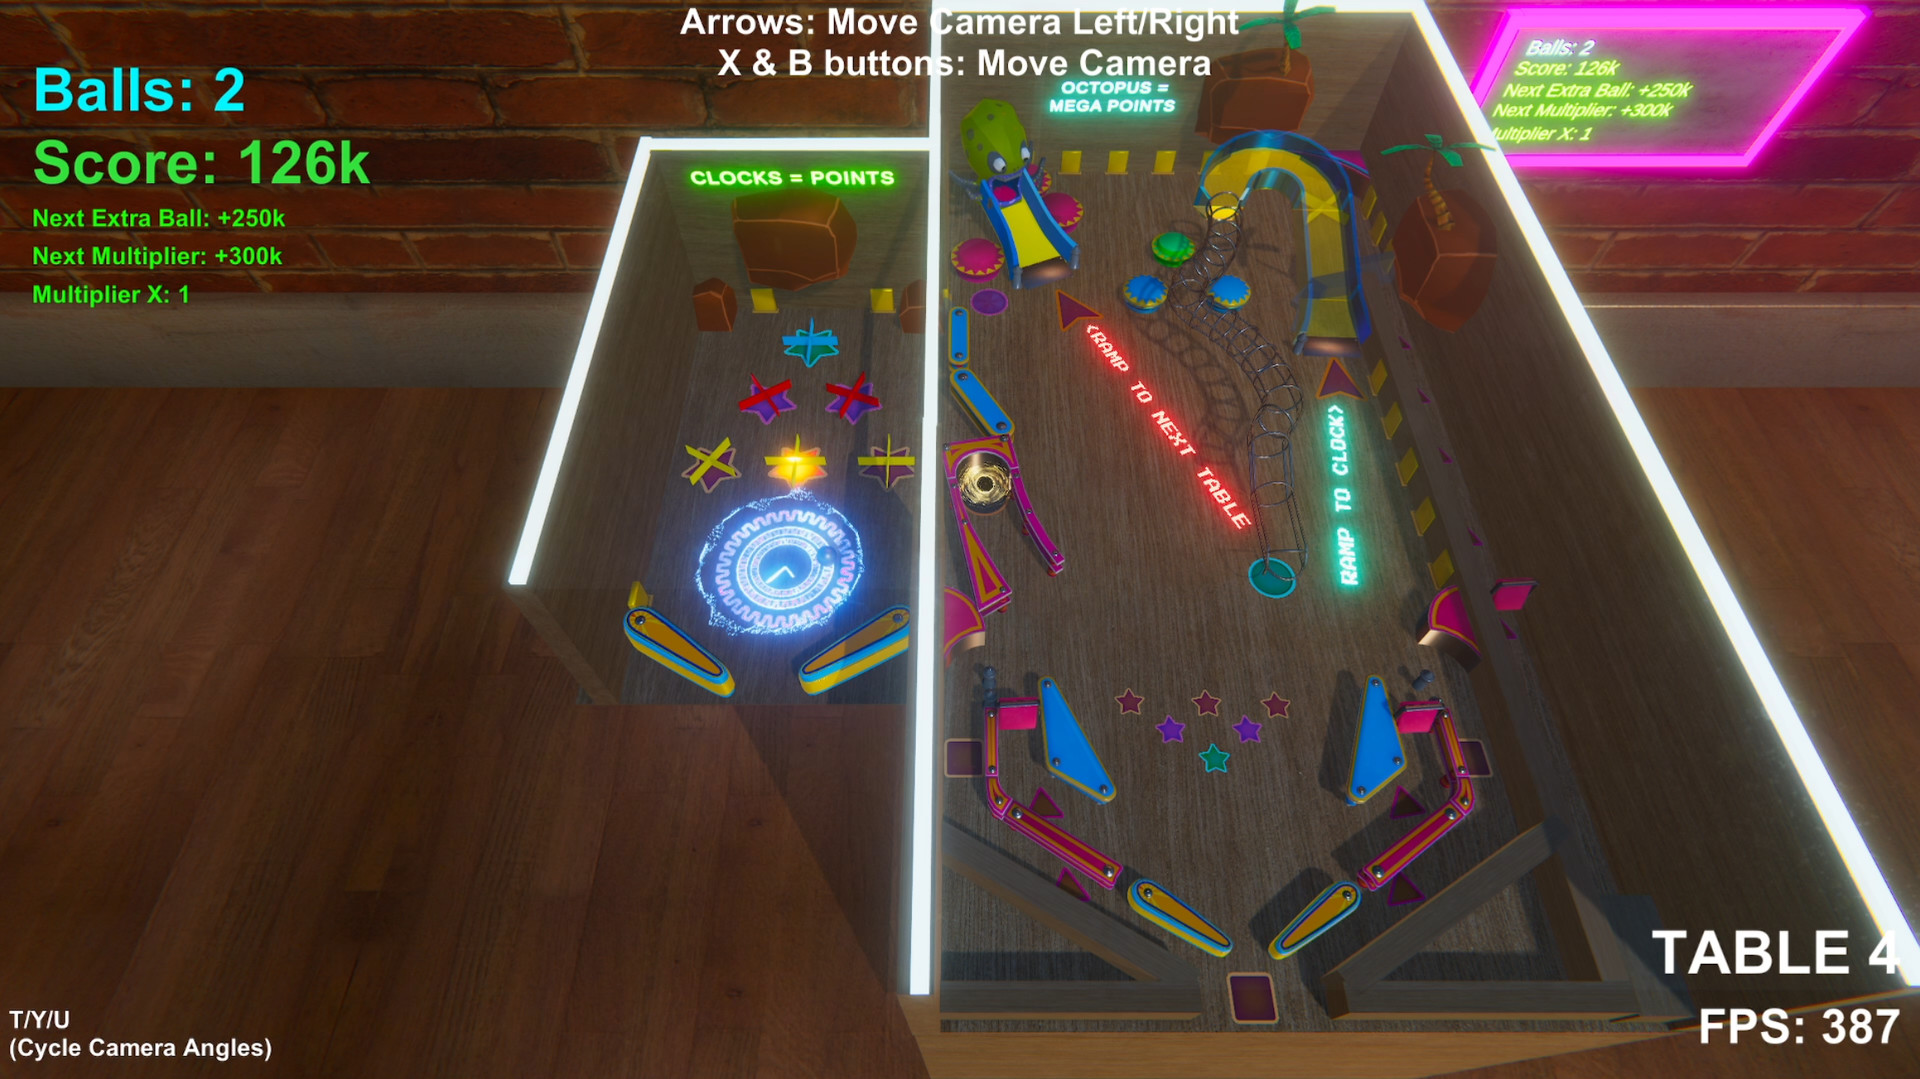 3d pinball games for pc